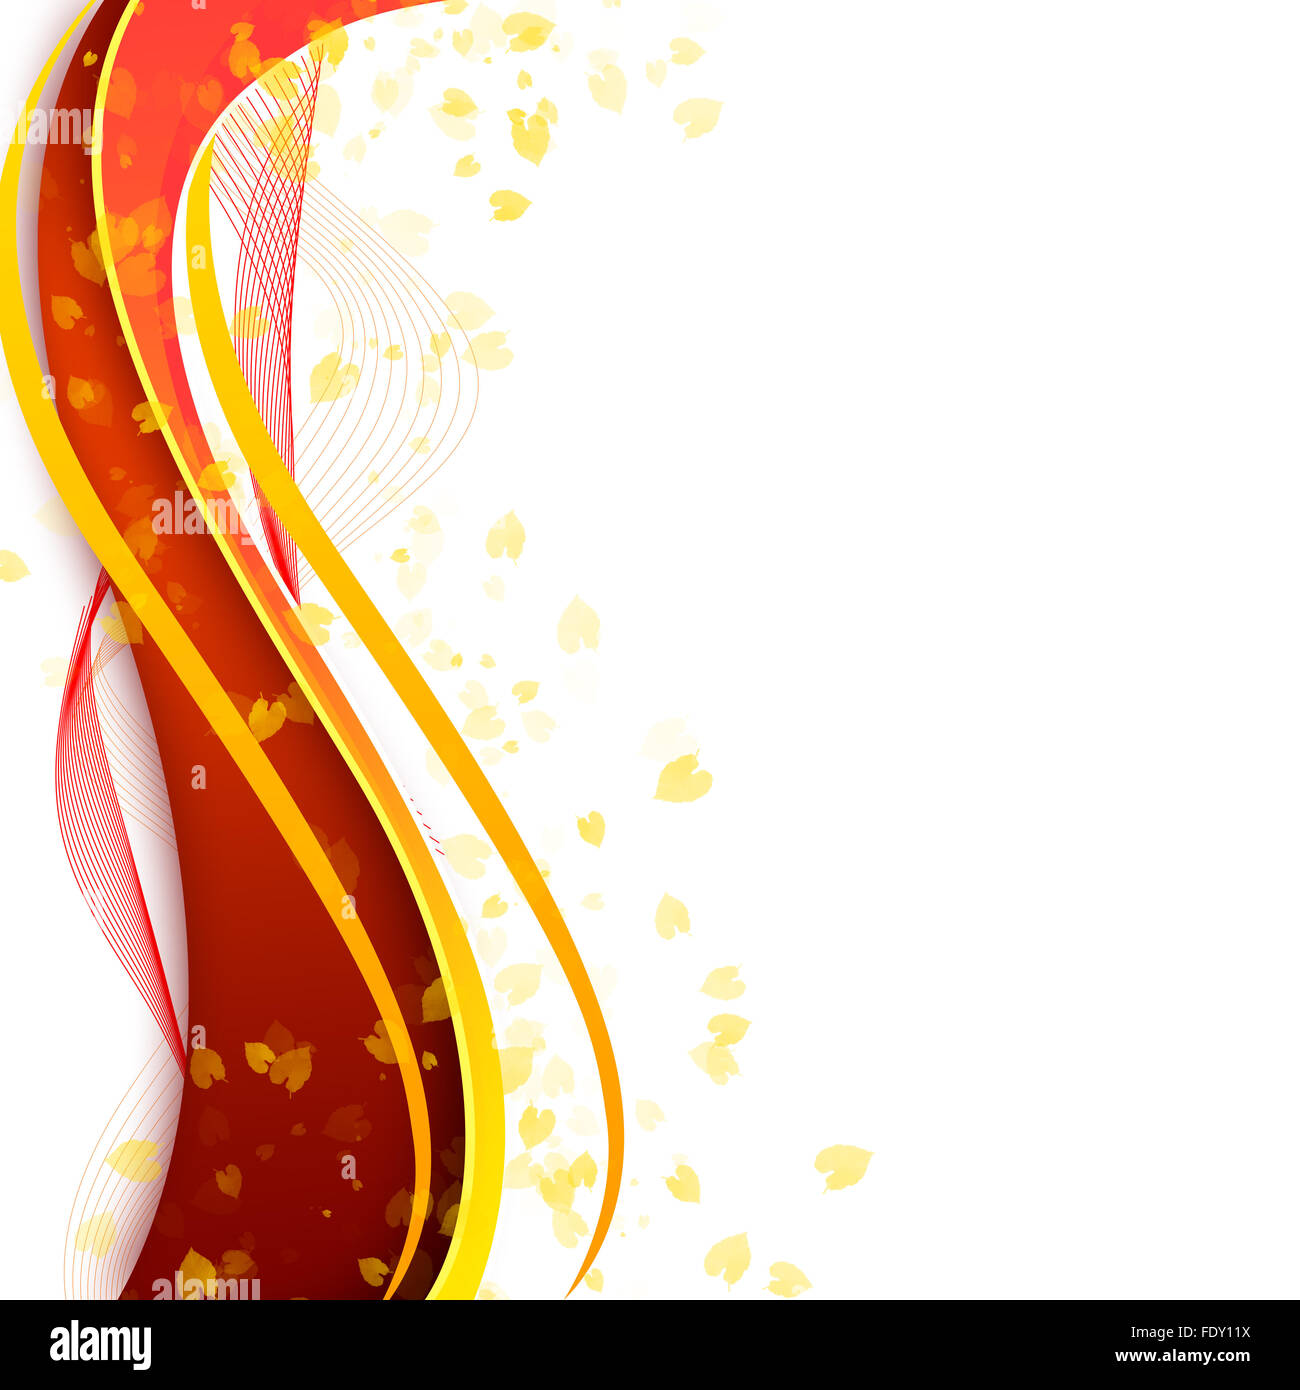 Abstract illustration with lines, arcs and yellow leaves. Stock Photo